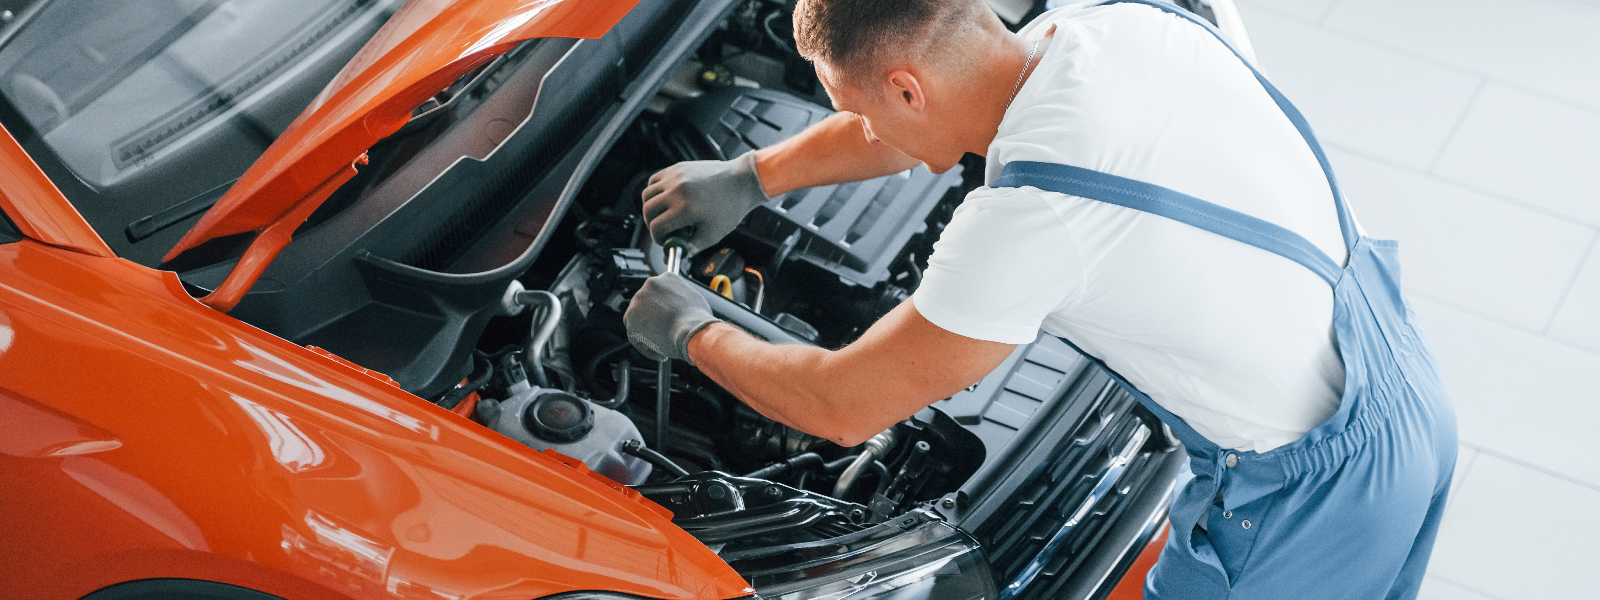 AK-GARAGE OÜ - We offer comprehensive car repair and maintenance services, utilizing modern equipment and high-quality pa...